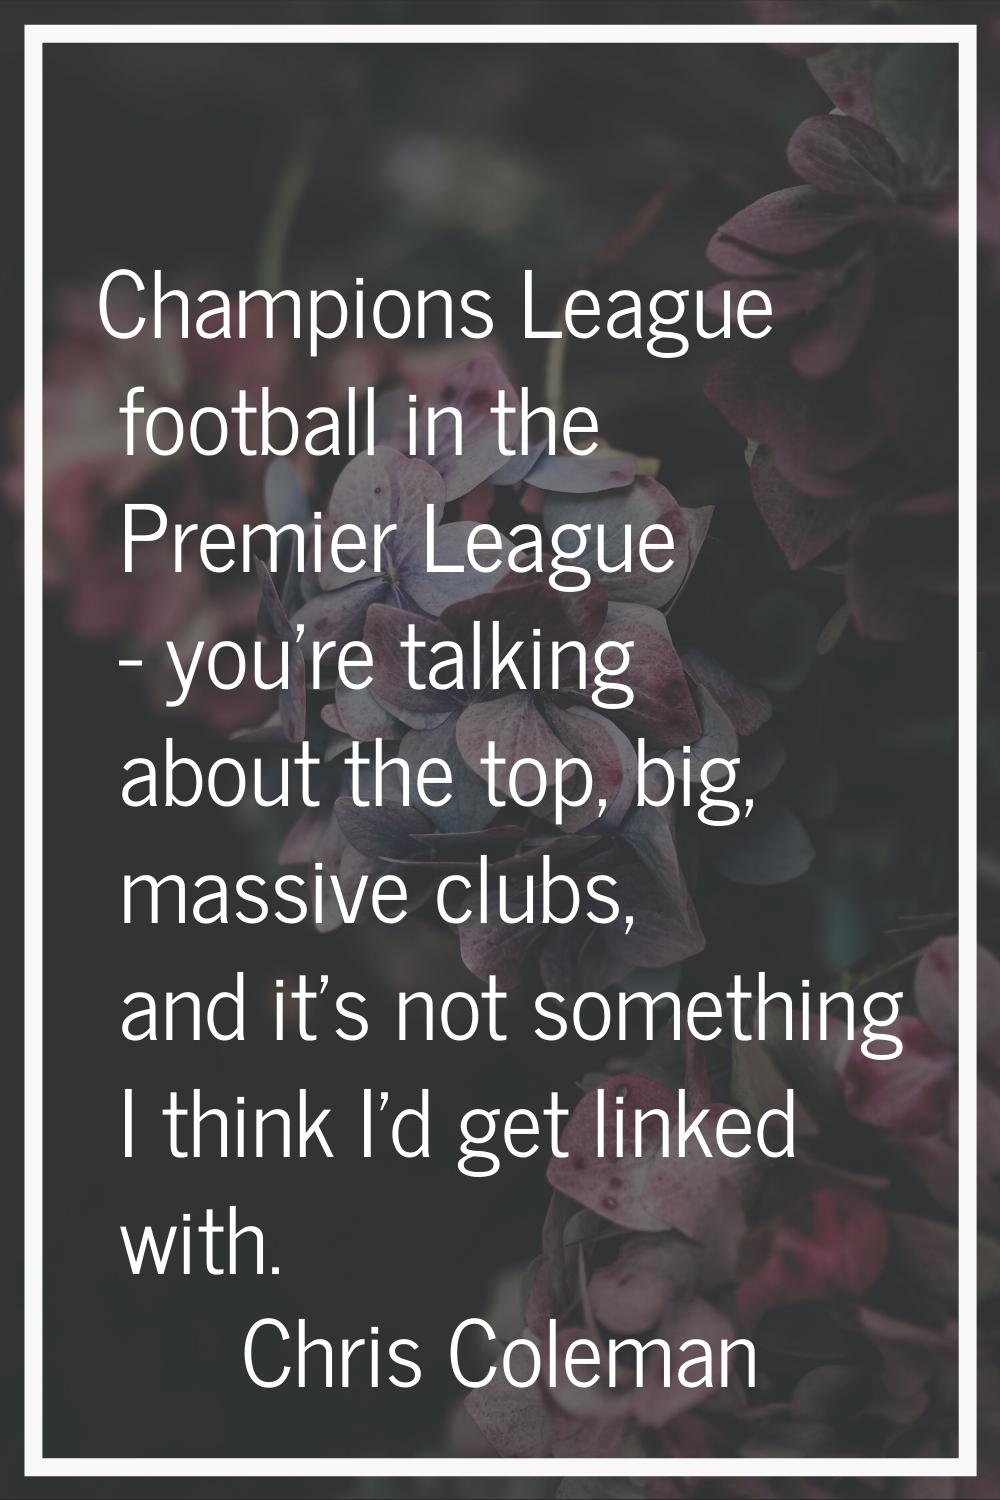 Champions League football in the Premier League - you're talking about the top, big, massive clubs,